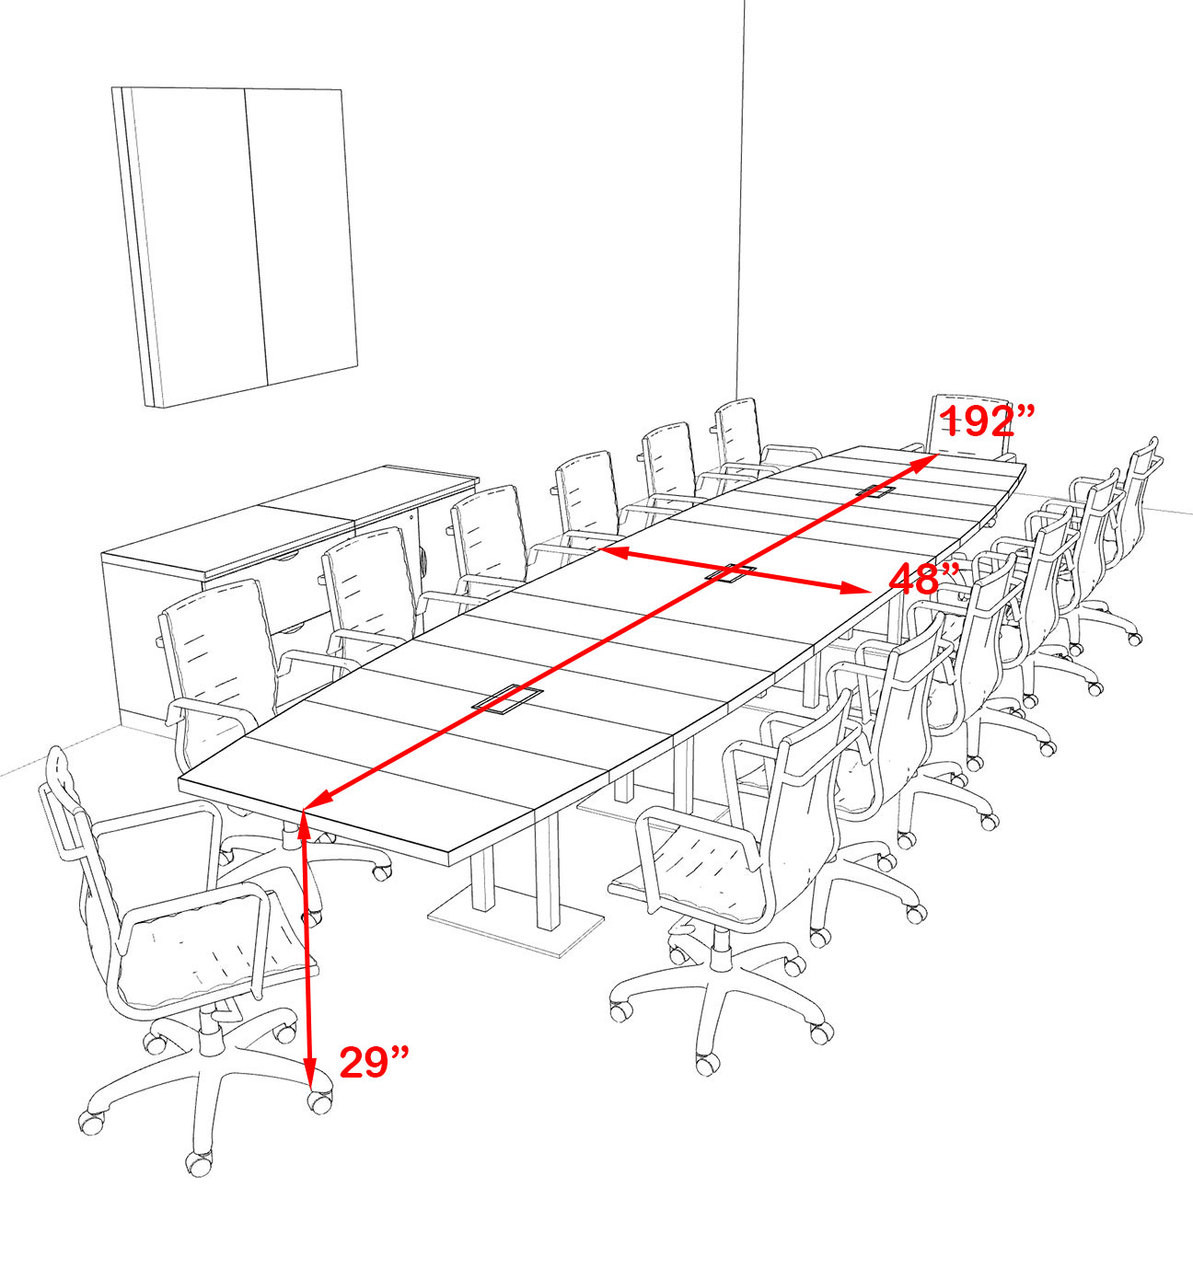 Modern Boat Shaped Steel Leg 16' Feet Conference Table, #OF-CON-CM46